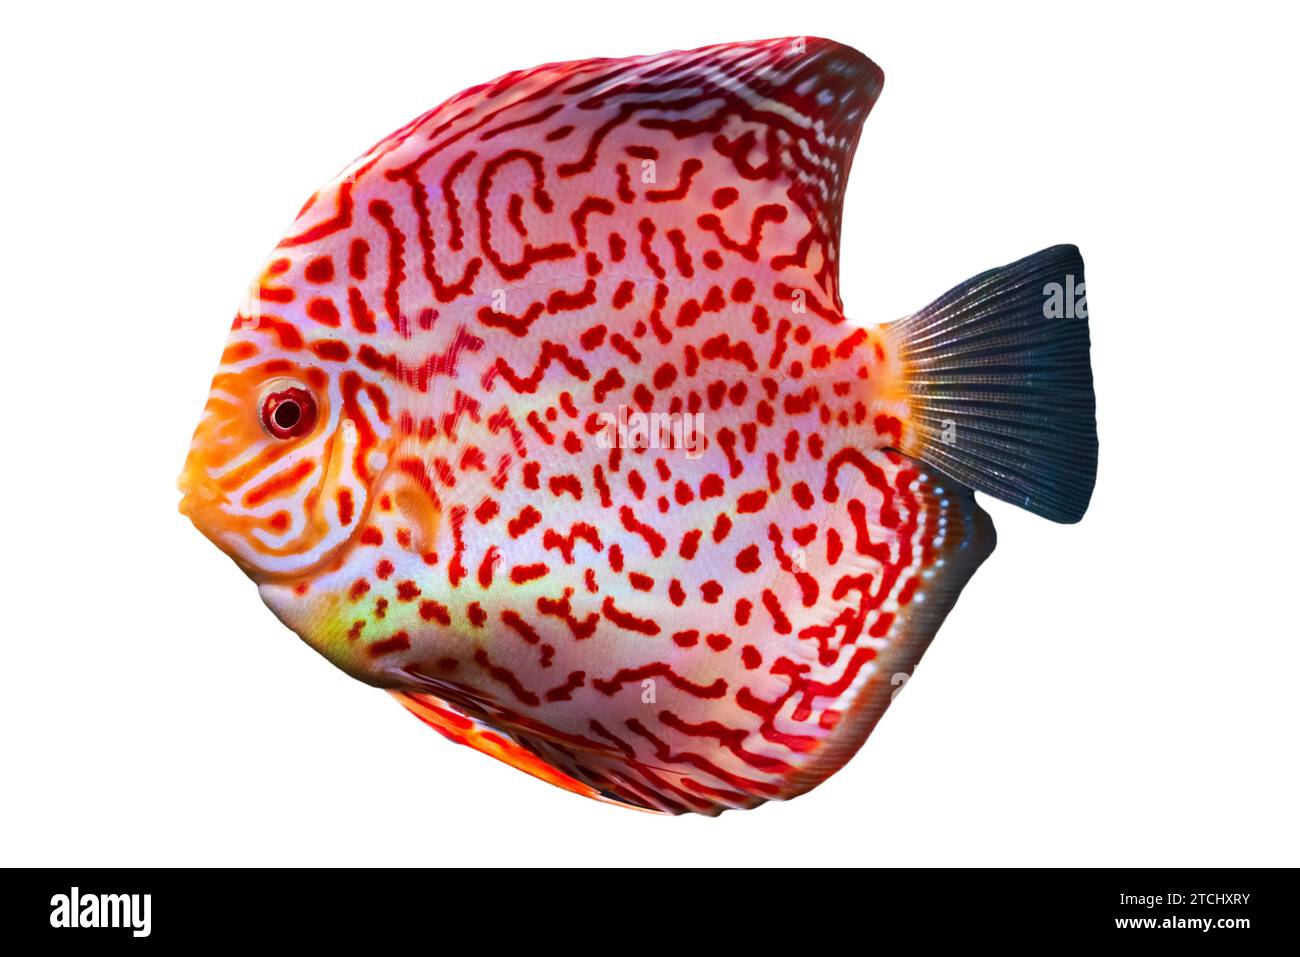 Closeup of a checkerboard red tropical discus (Symphysodon) fish. Isolated on white background Stock Photo